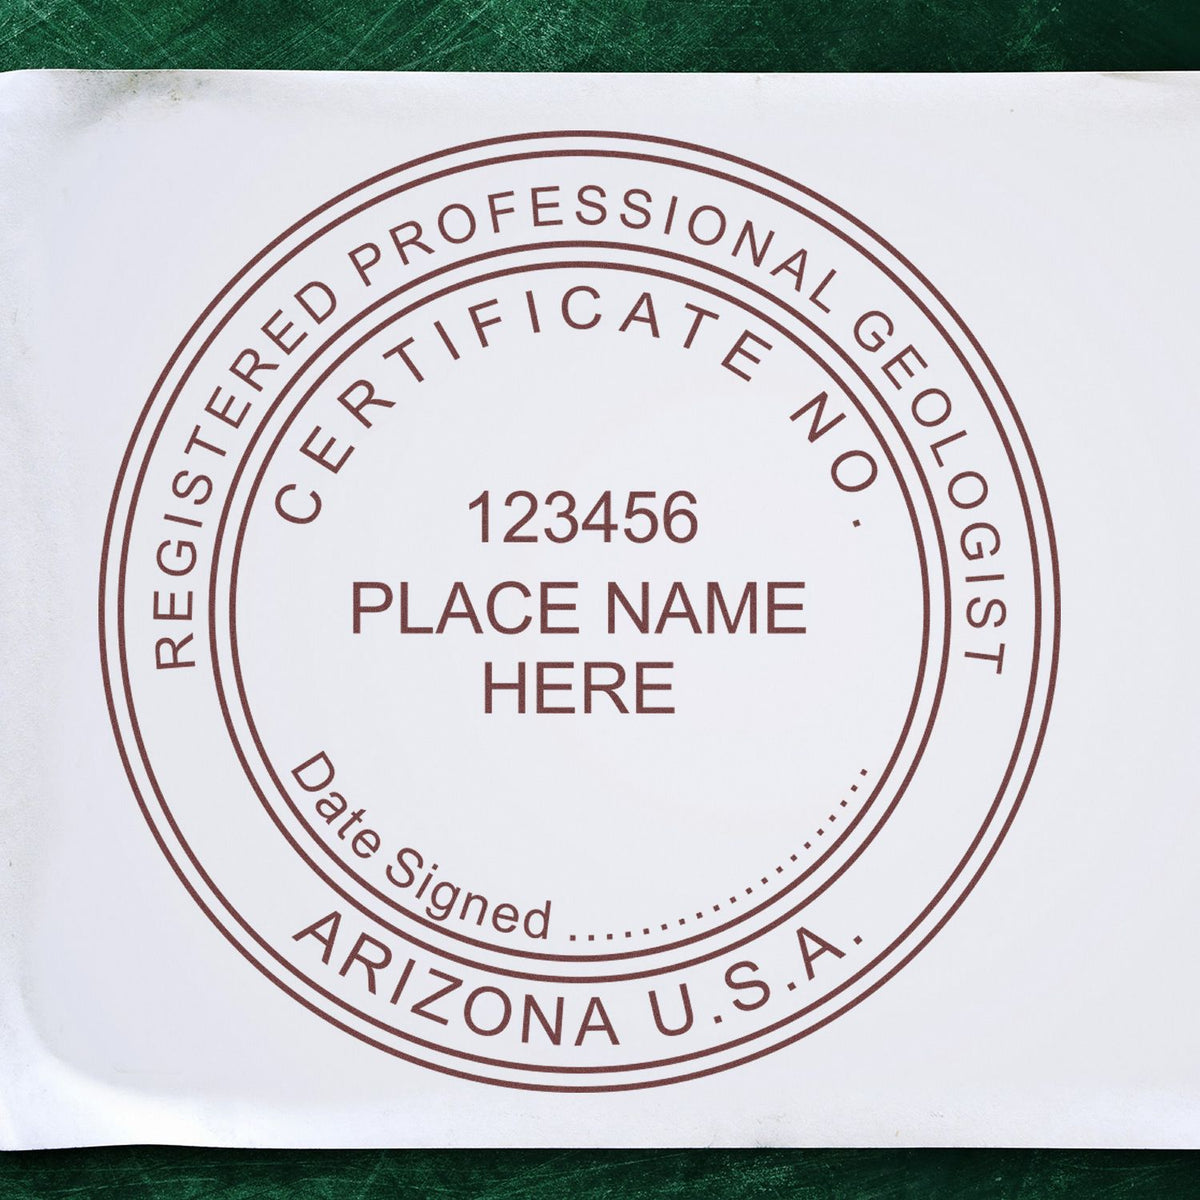 Another Example of a stamped impression of the Arizona Professional Geologist Seal Stamp on a office form